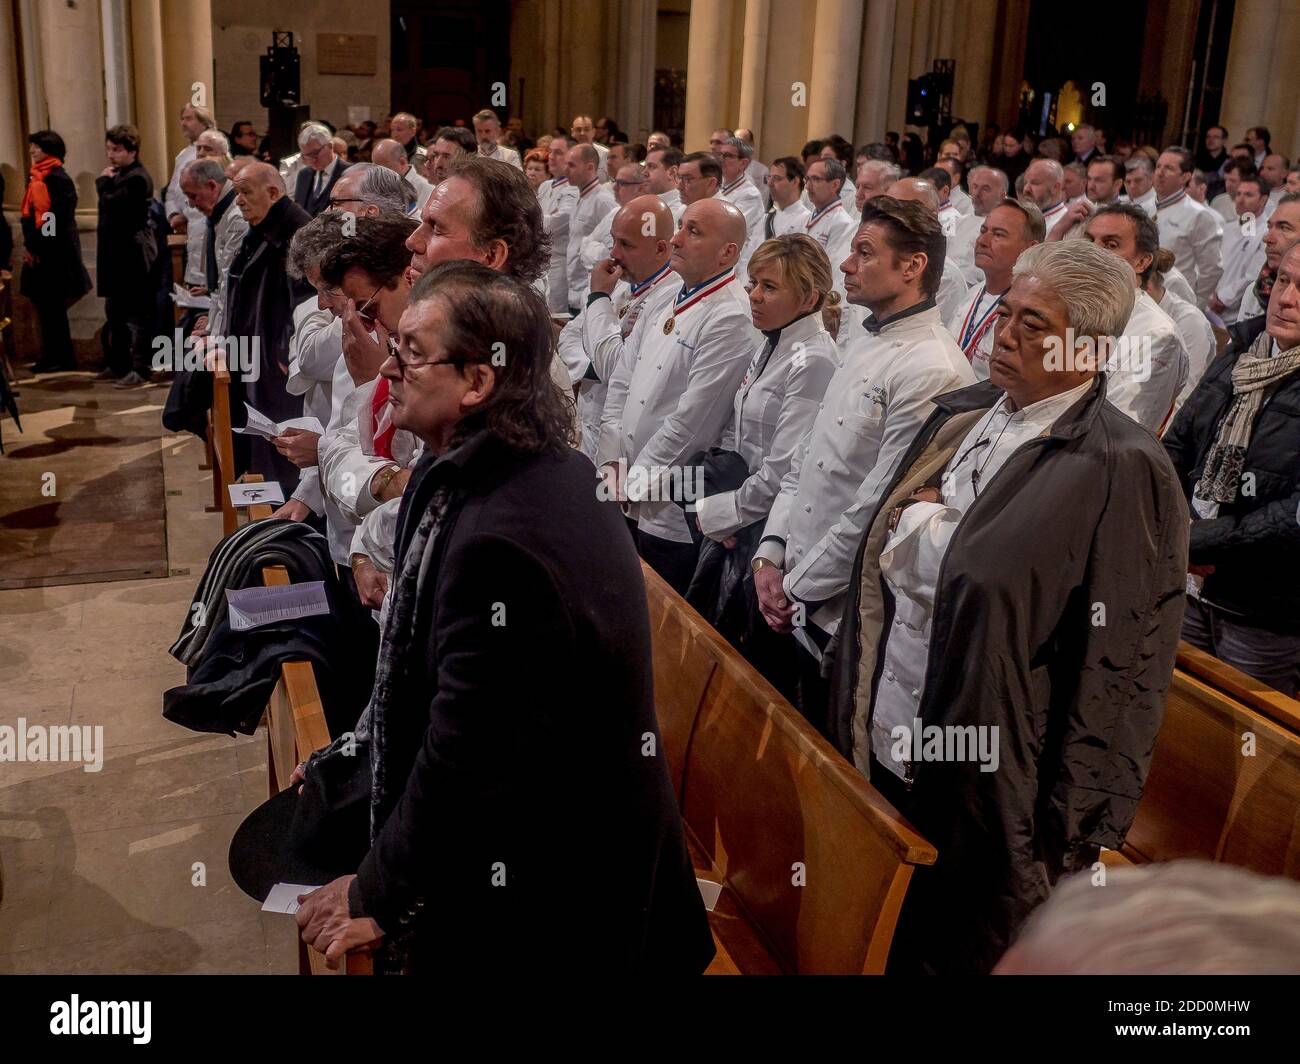 Paul Bocuse's funeral took place in the cathedral St Jean, Lyon. Photo by  Bony/Pool/ABACAPRESS.COM Stock Photo - Alamy